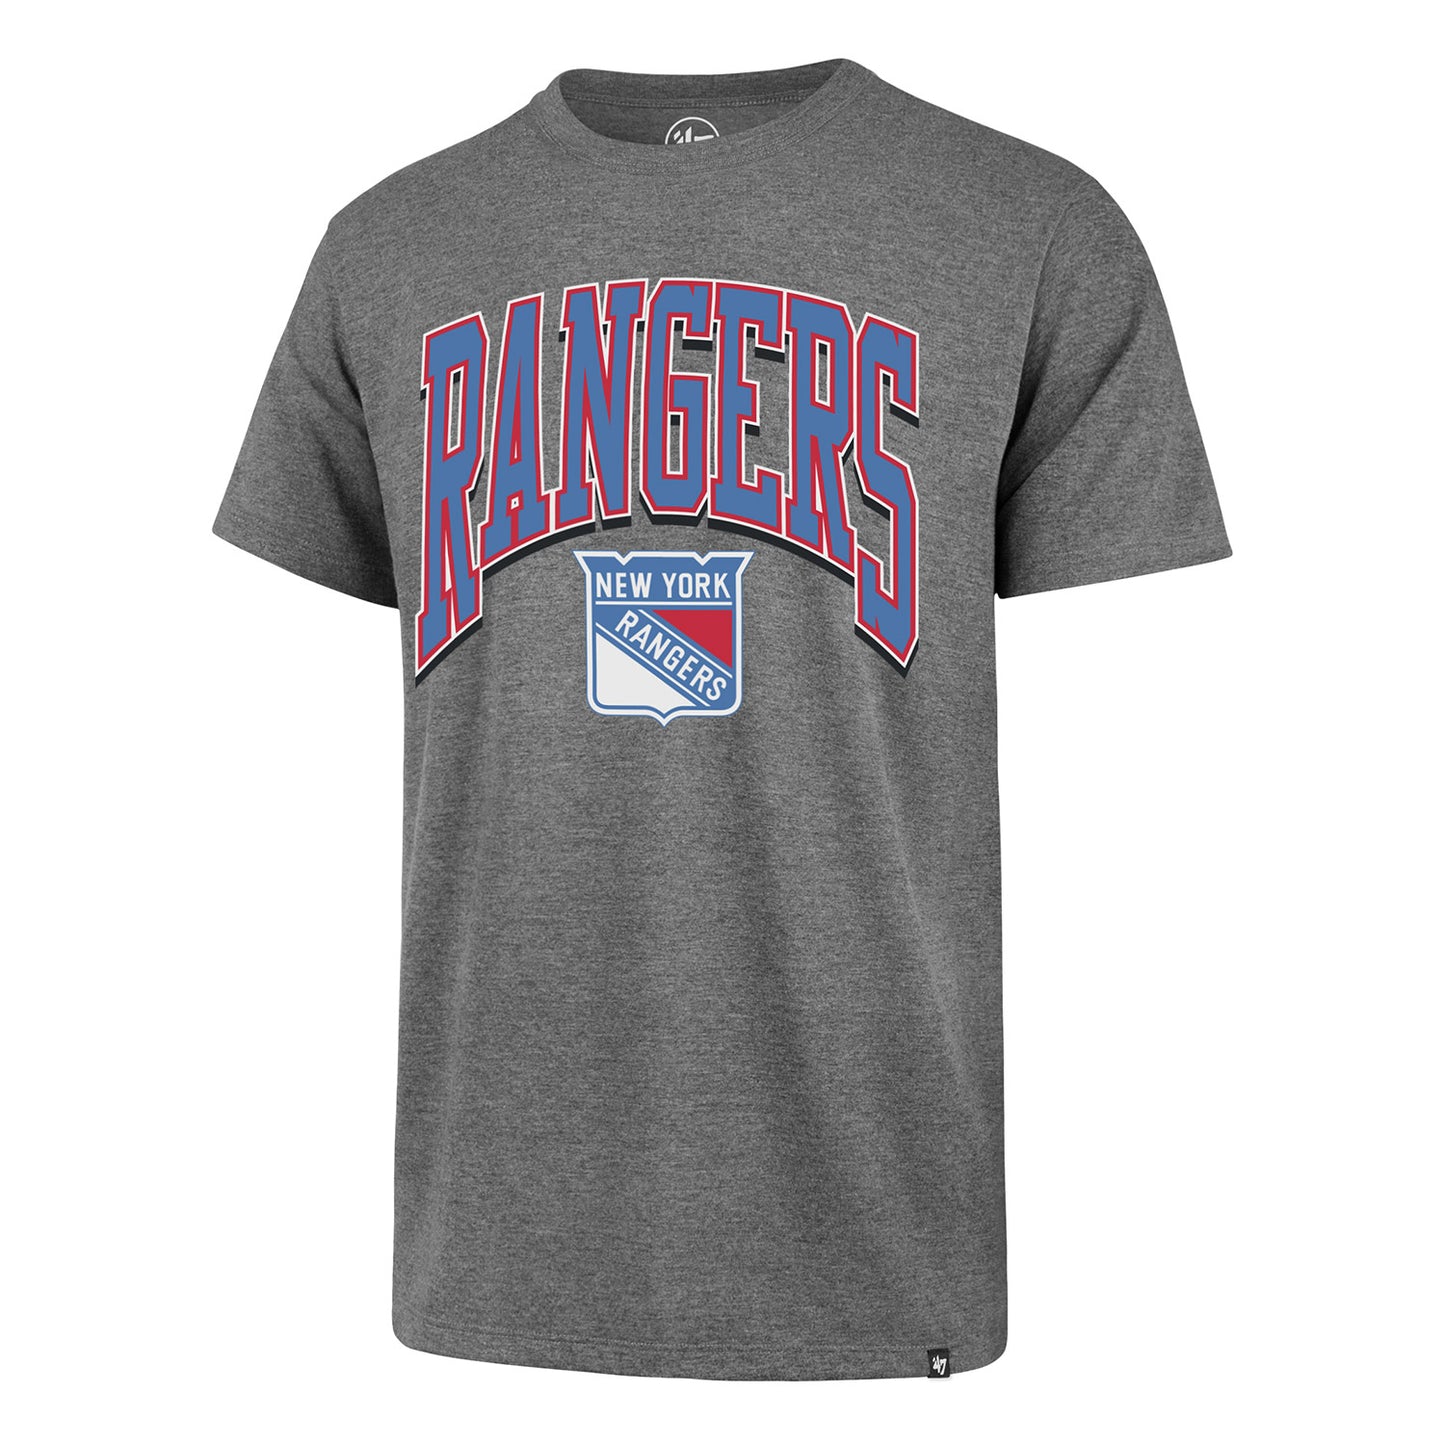 '47 Brand Rangers Walk Tall Franklin Tee In Grey - Front View